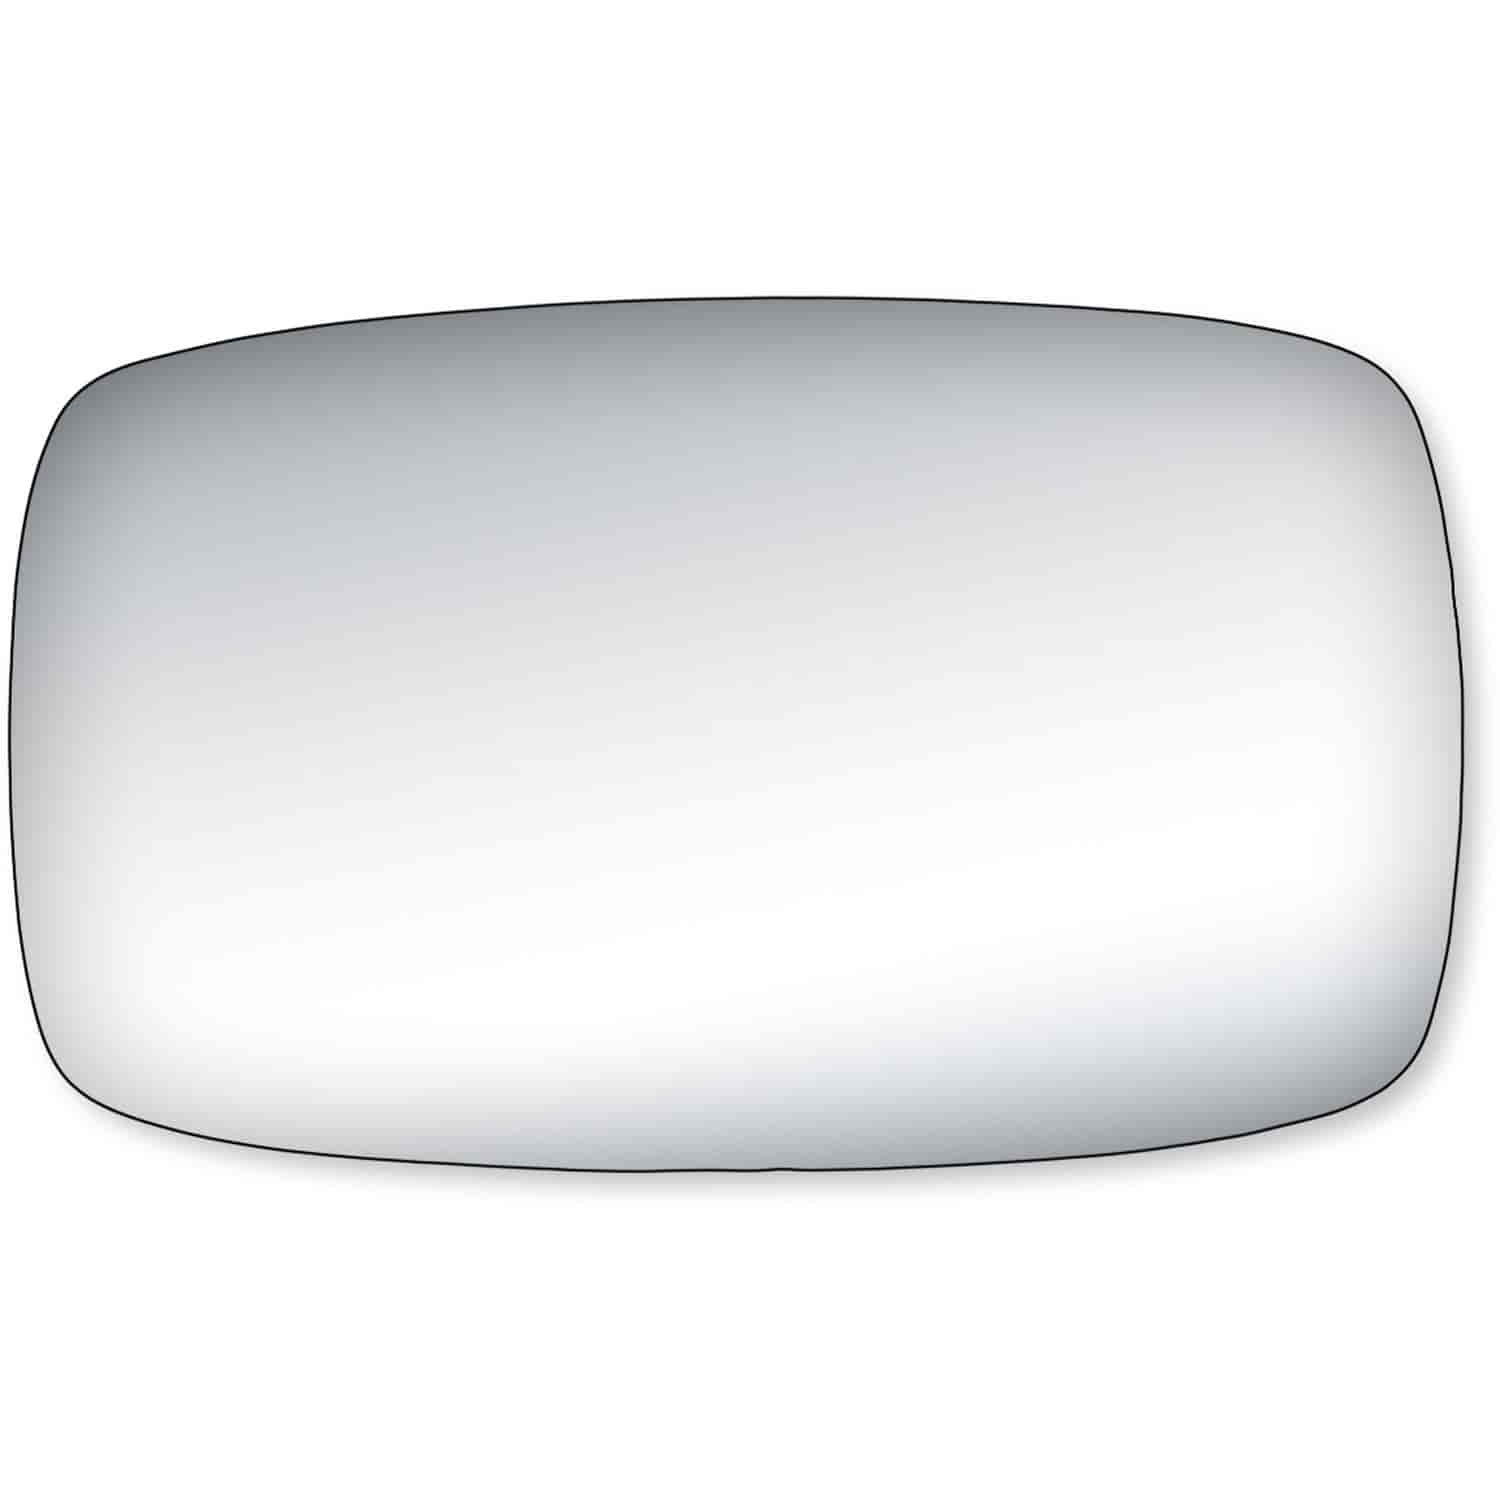 Replacement Glass for 95-00 Contour; 95-00 Mystique the